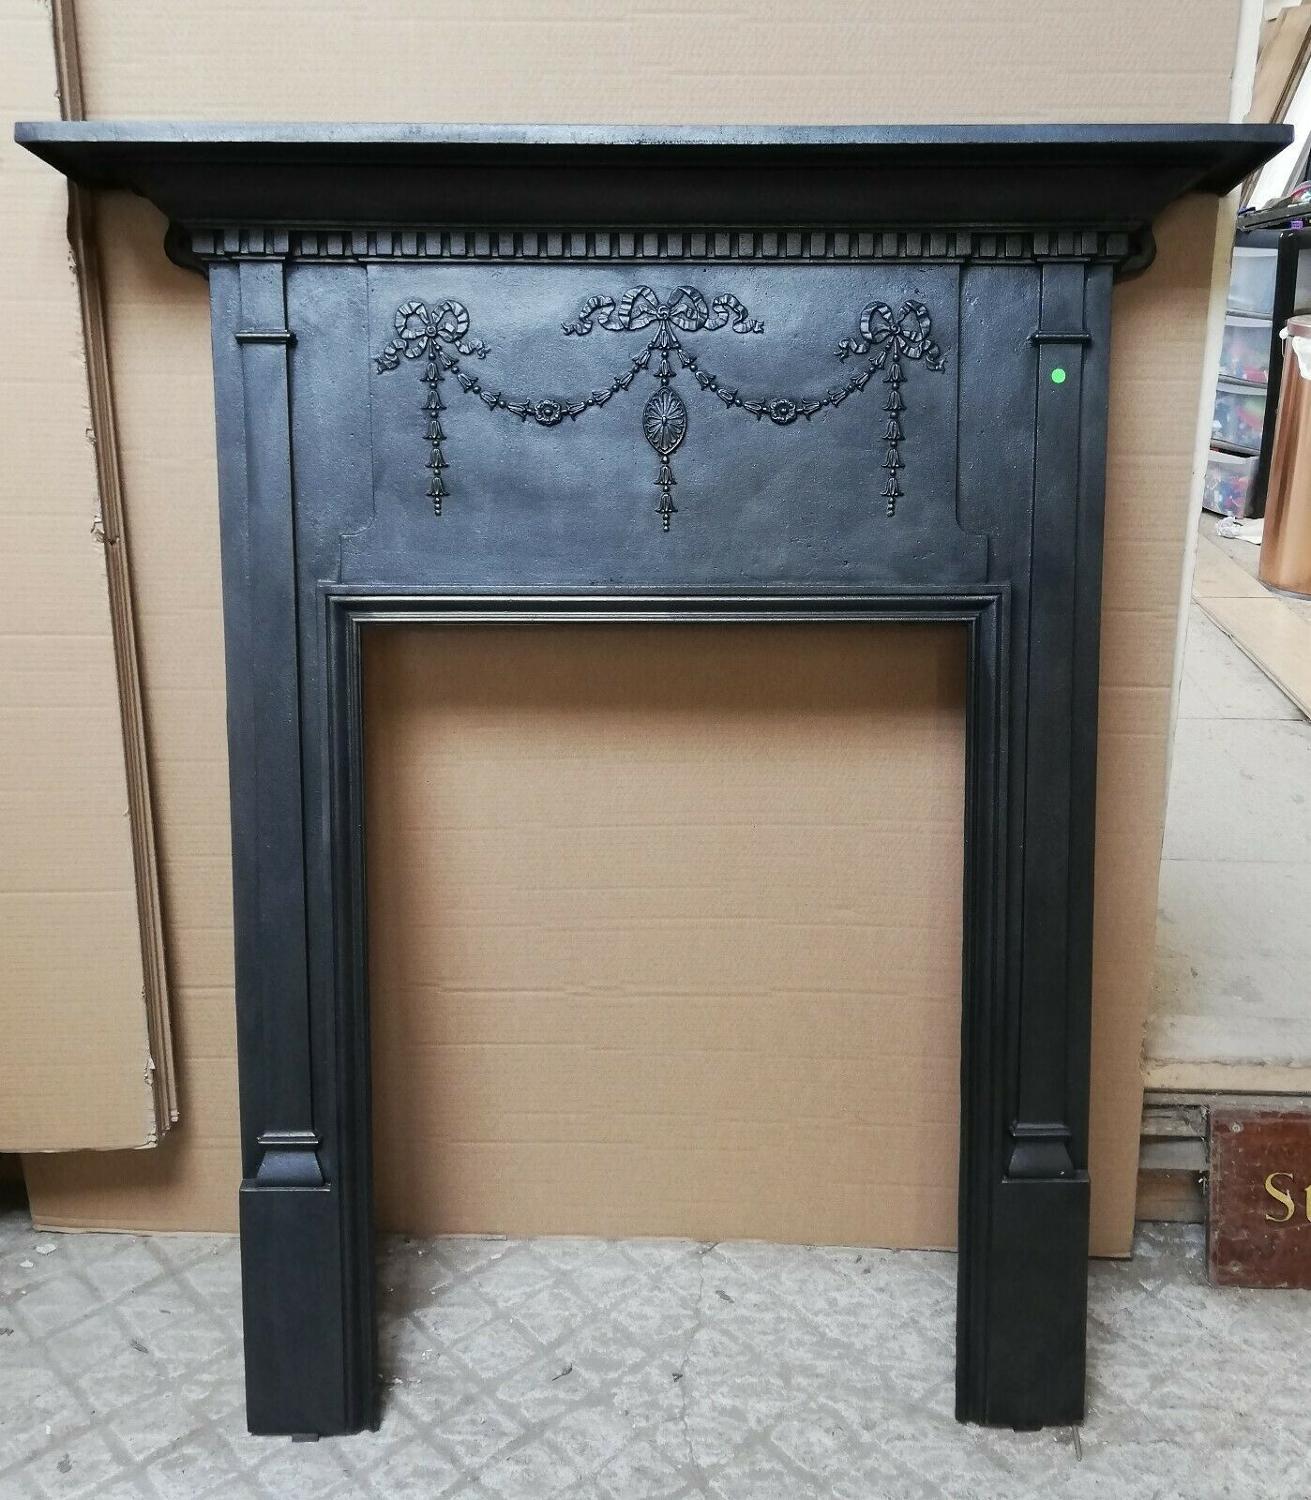 FS0081 VICTORIAN CAST IRON FIRE SURROUND FOR WOOD BURNER